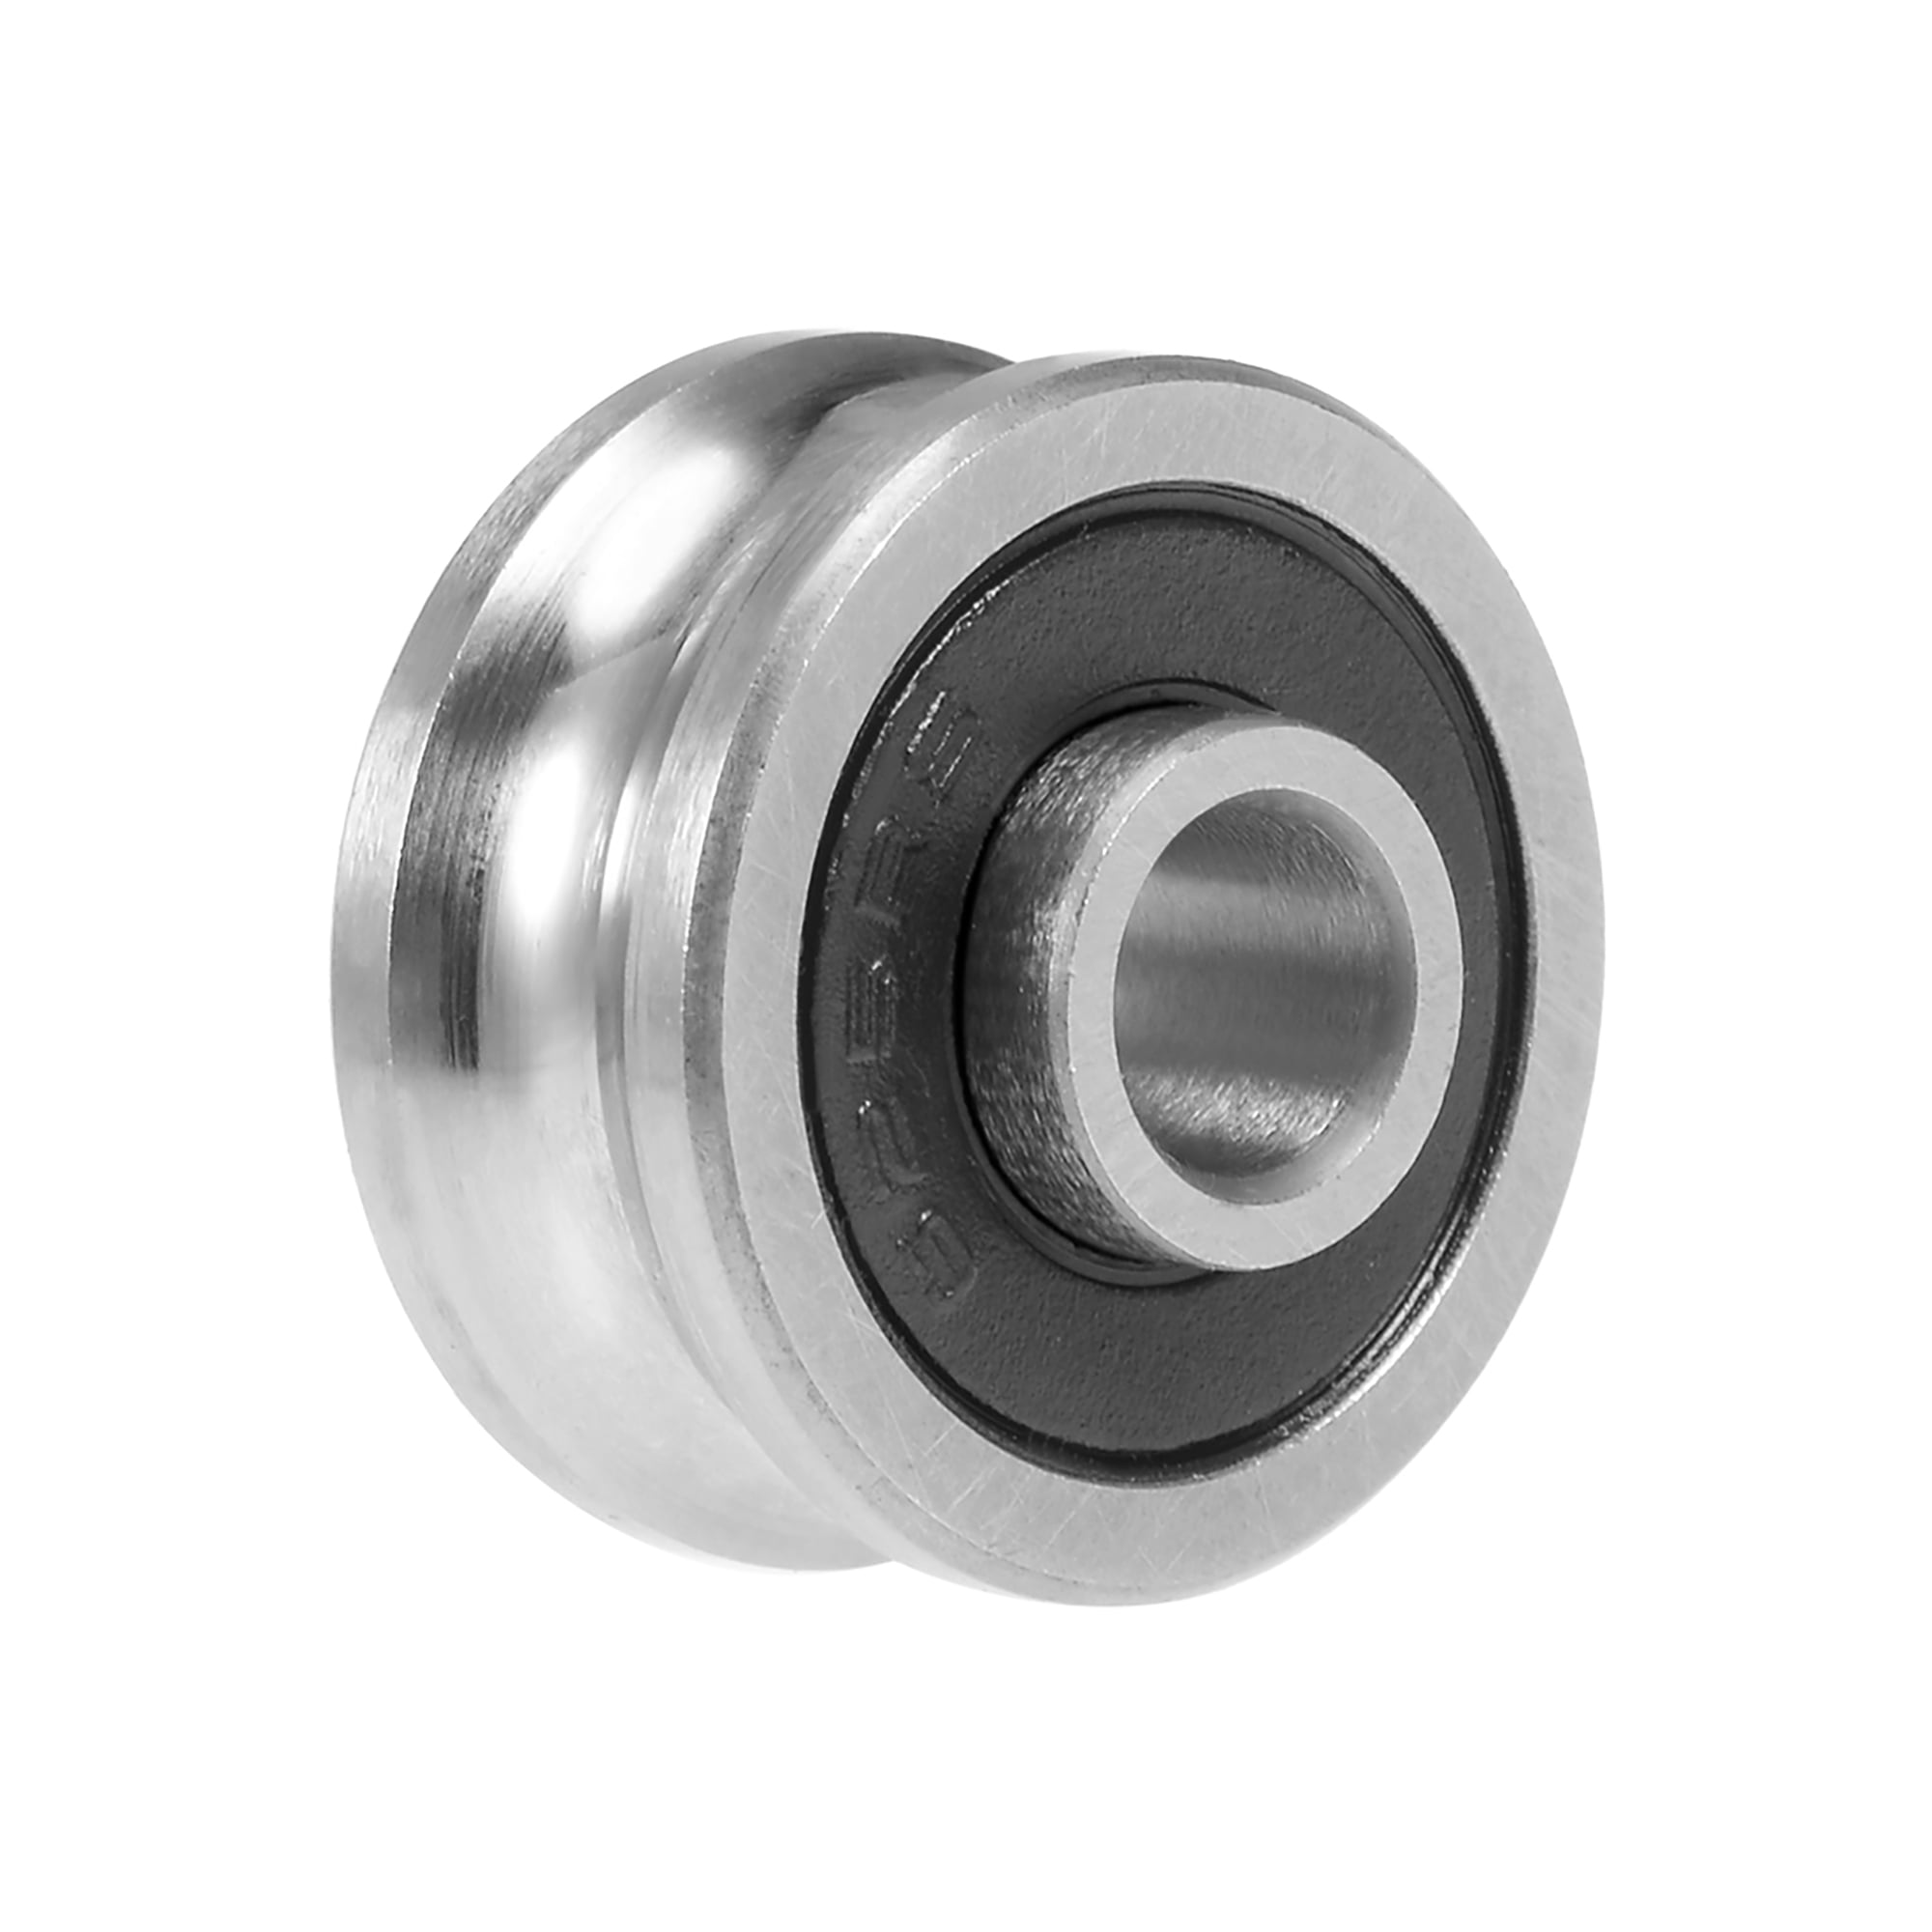 Othmro SG15 U-Groove Track Guide Bearing 5x17x8mm Pulley Wheel Bearings for Textile Machine Dual Row 